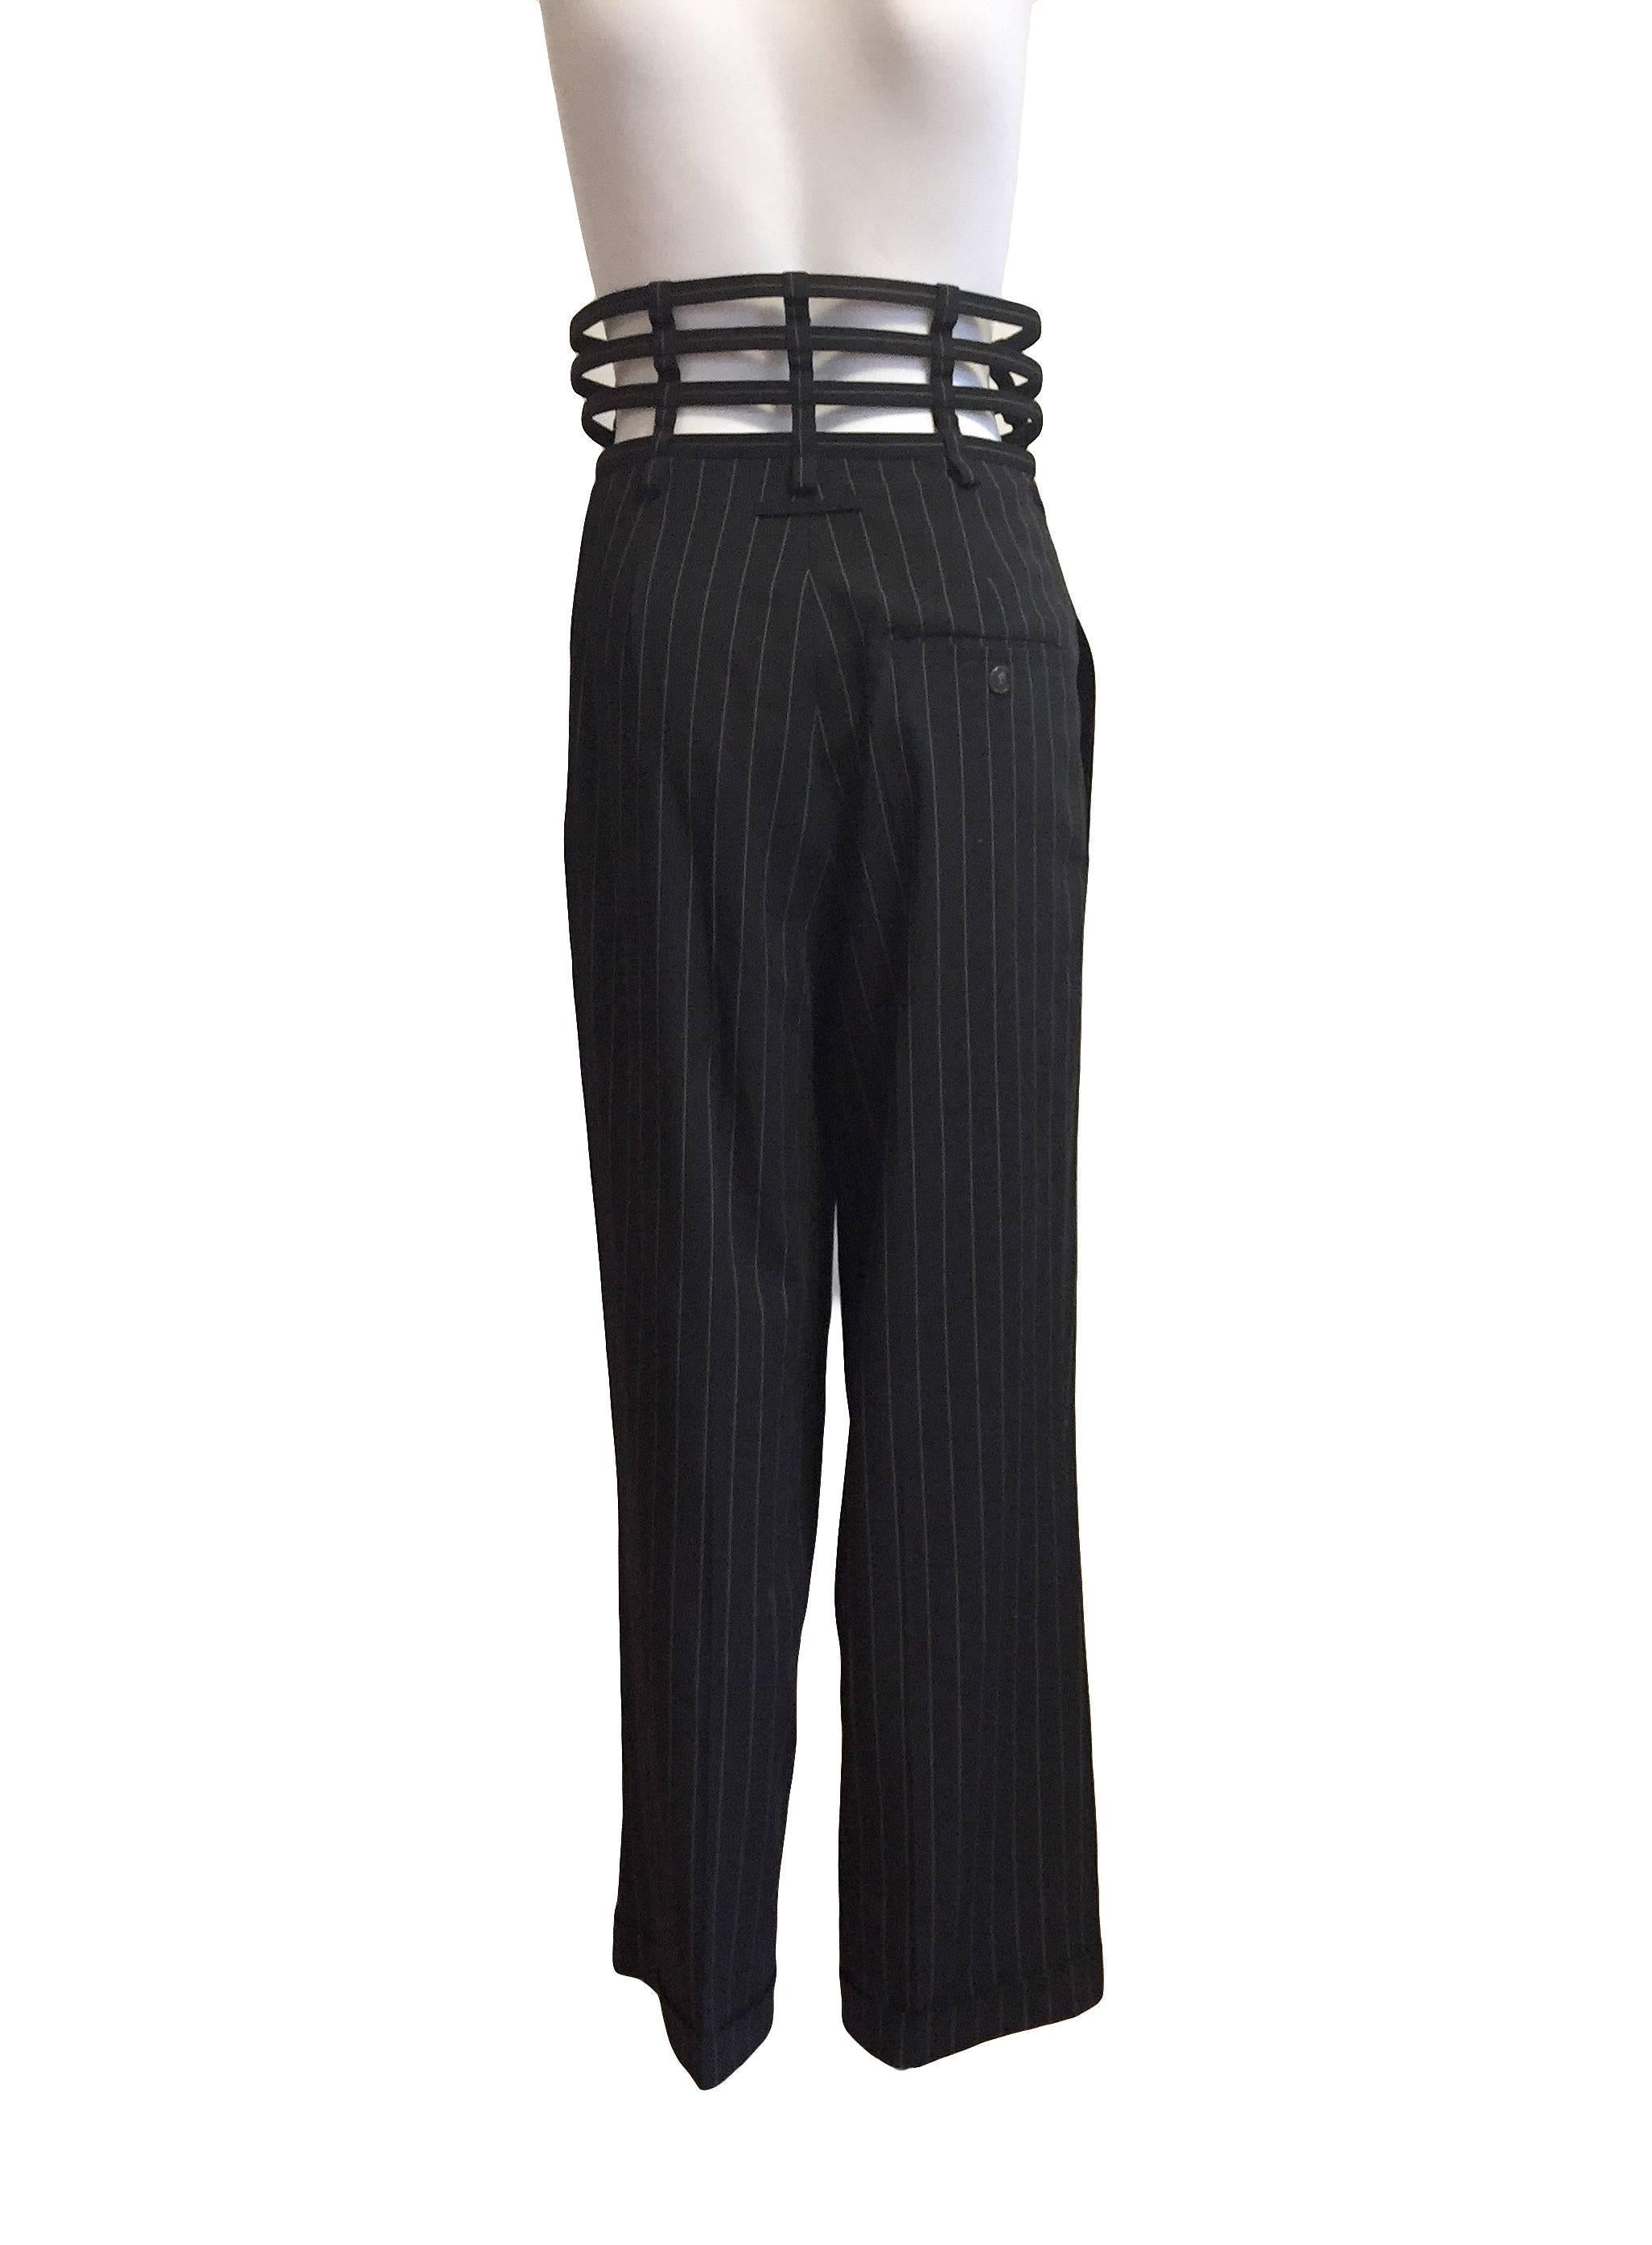 Women's Iconic Jean Paul Gaultier Cage Pants, Circa 1990 For Sale